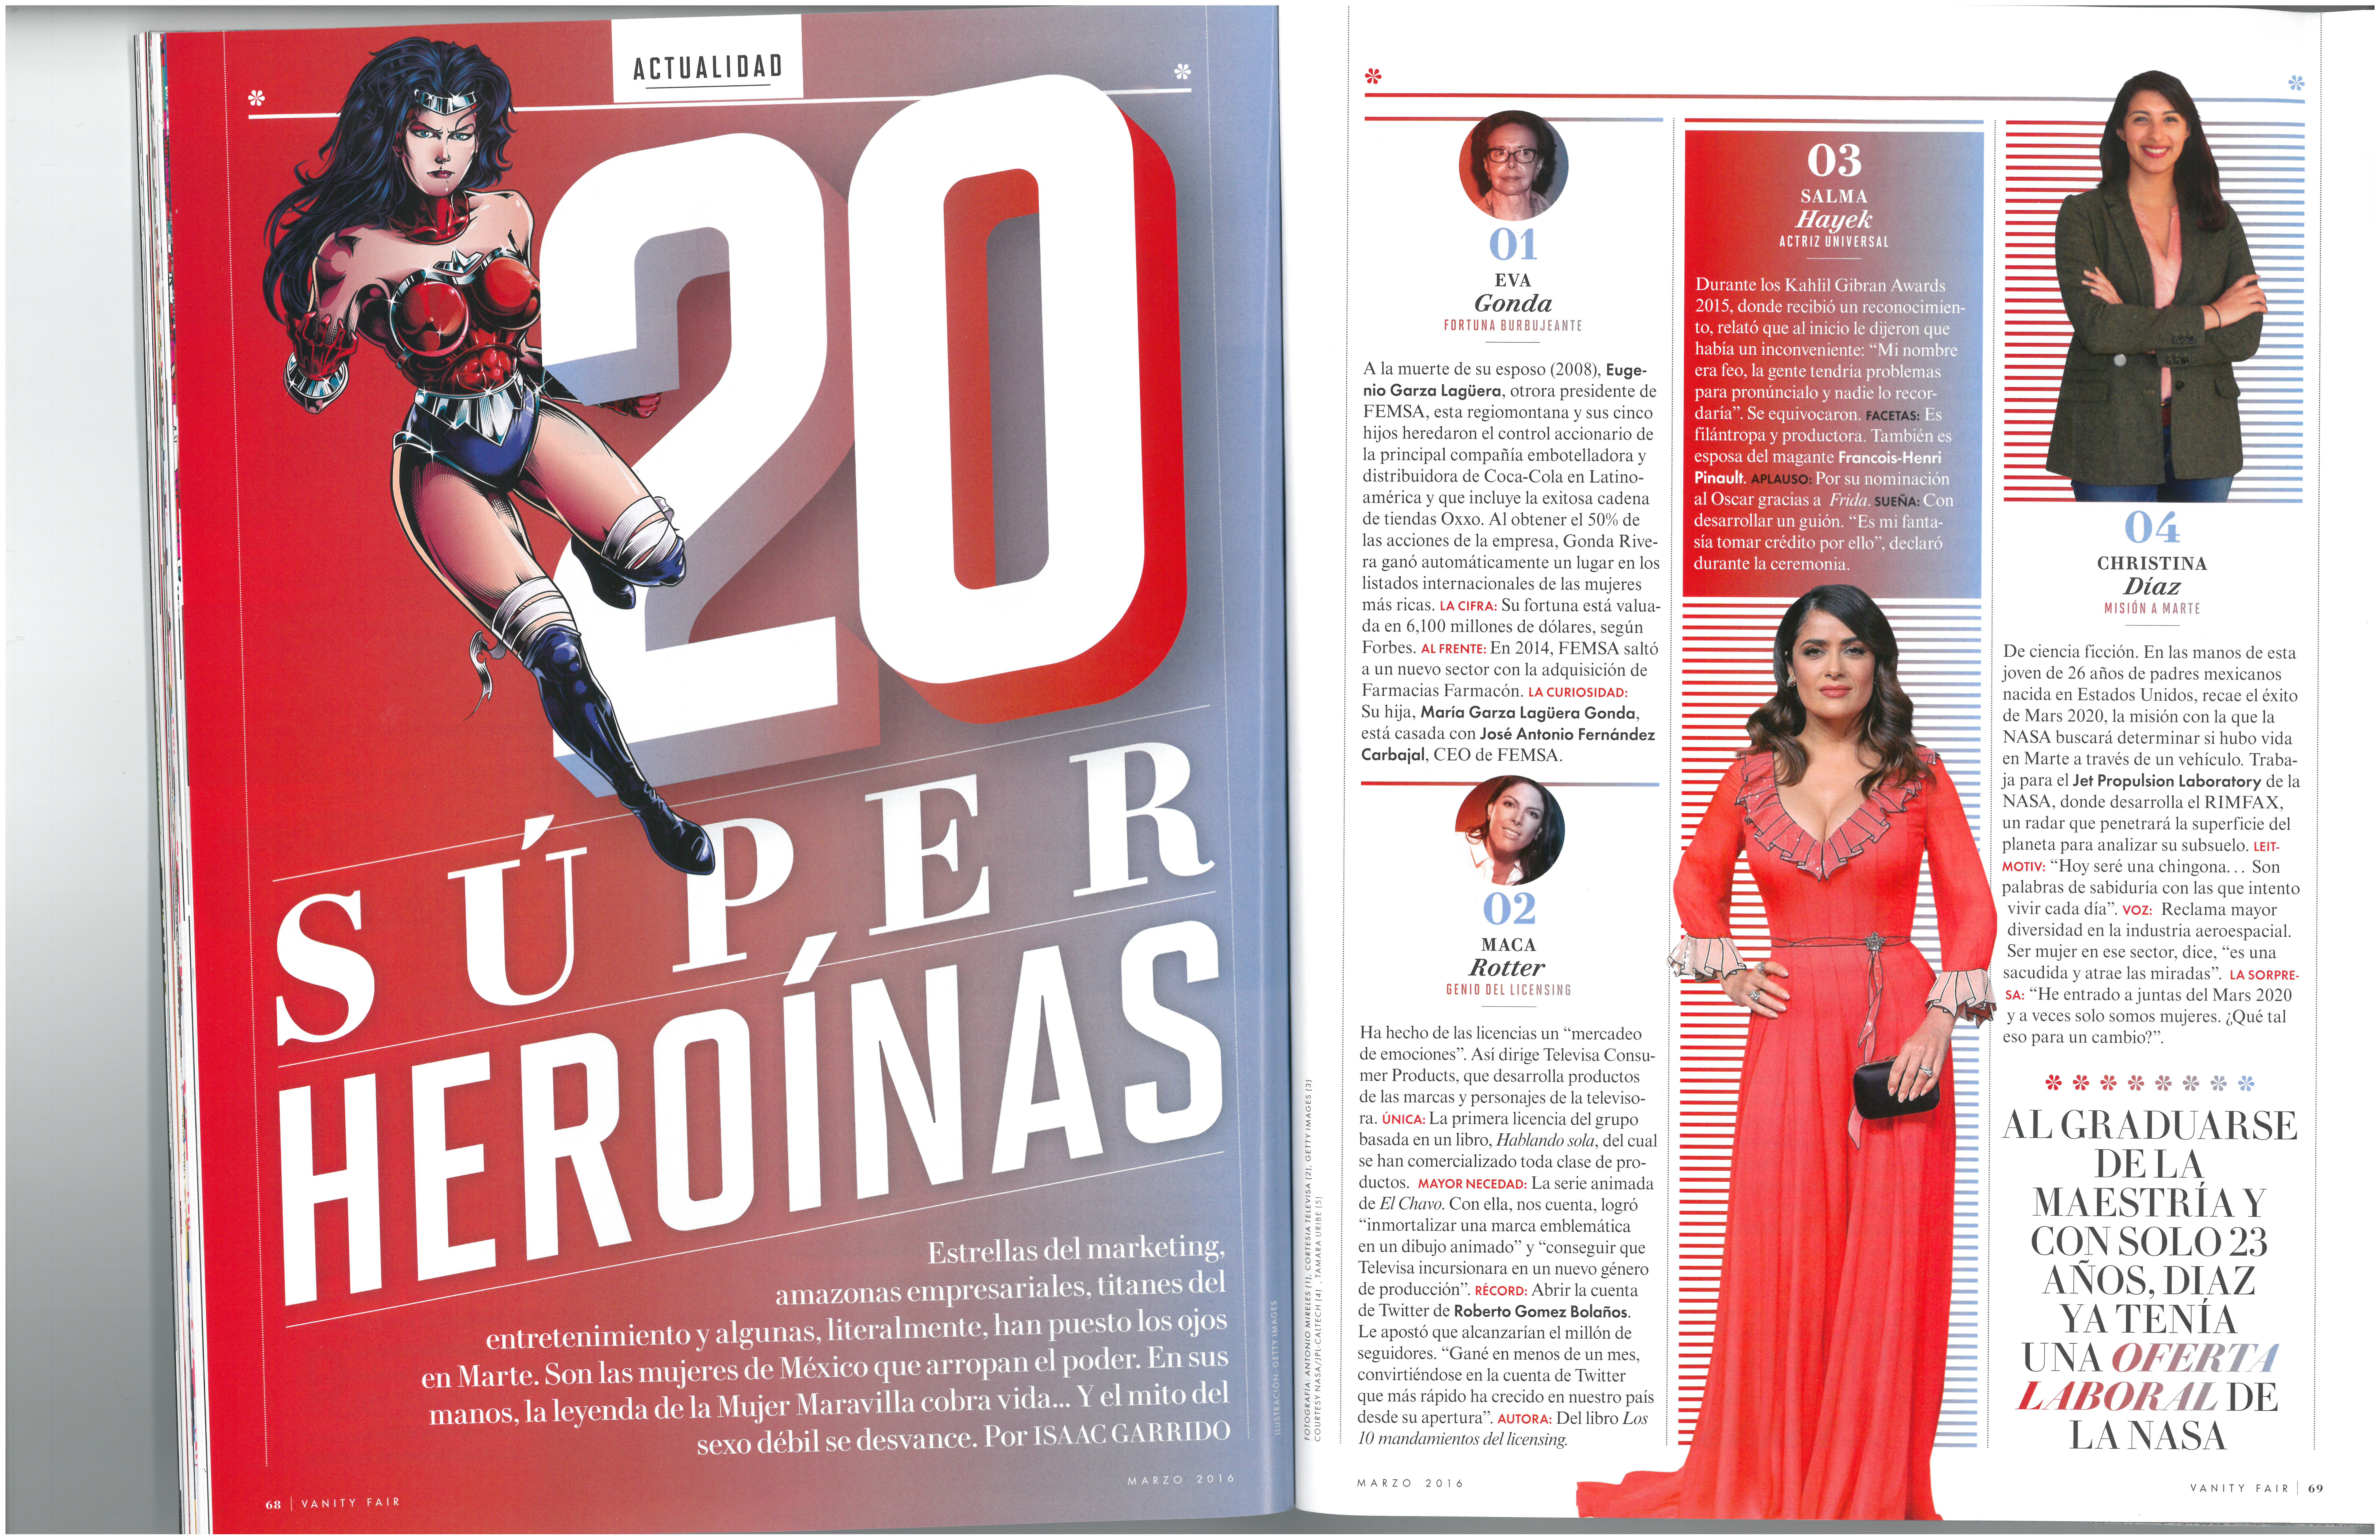 Christina featured in Vanity Fair Mexico